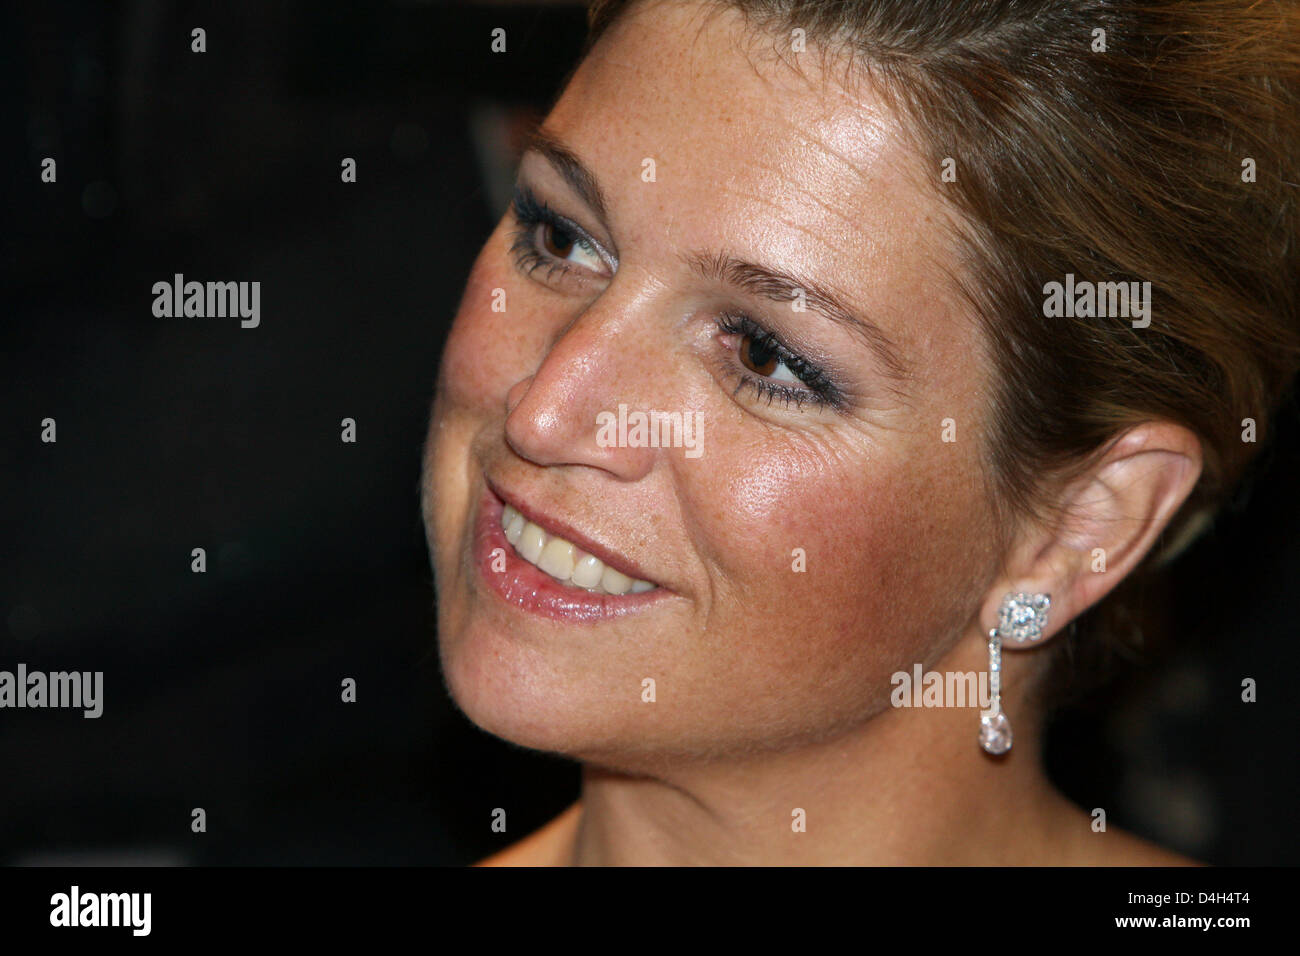 Crown Princess Maxima of the Netherlands attends the jubilee concert of the 120 year old Royal Concertgebouworkest, a famous Dutch orchestra, in Amsterdam, Netherlands, 24 October 2008. Photo: Patrick van Katwijk Stock Photo